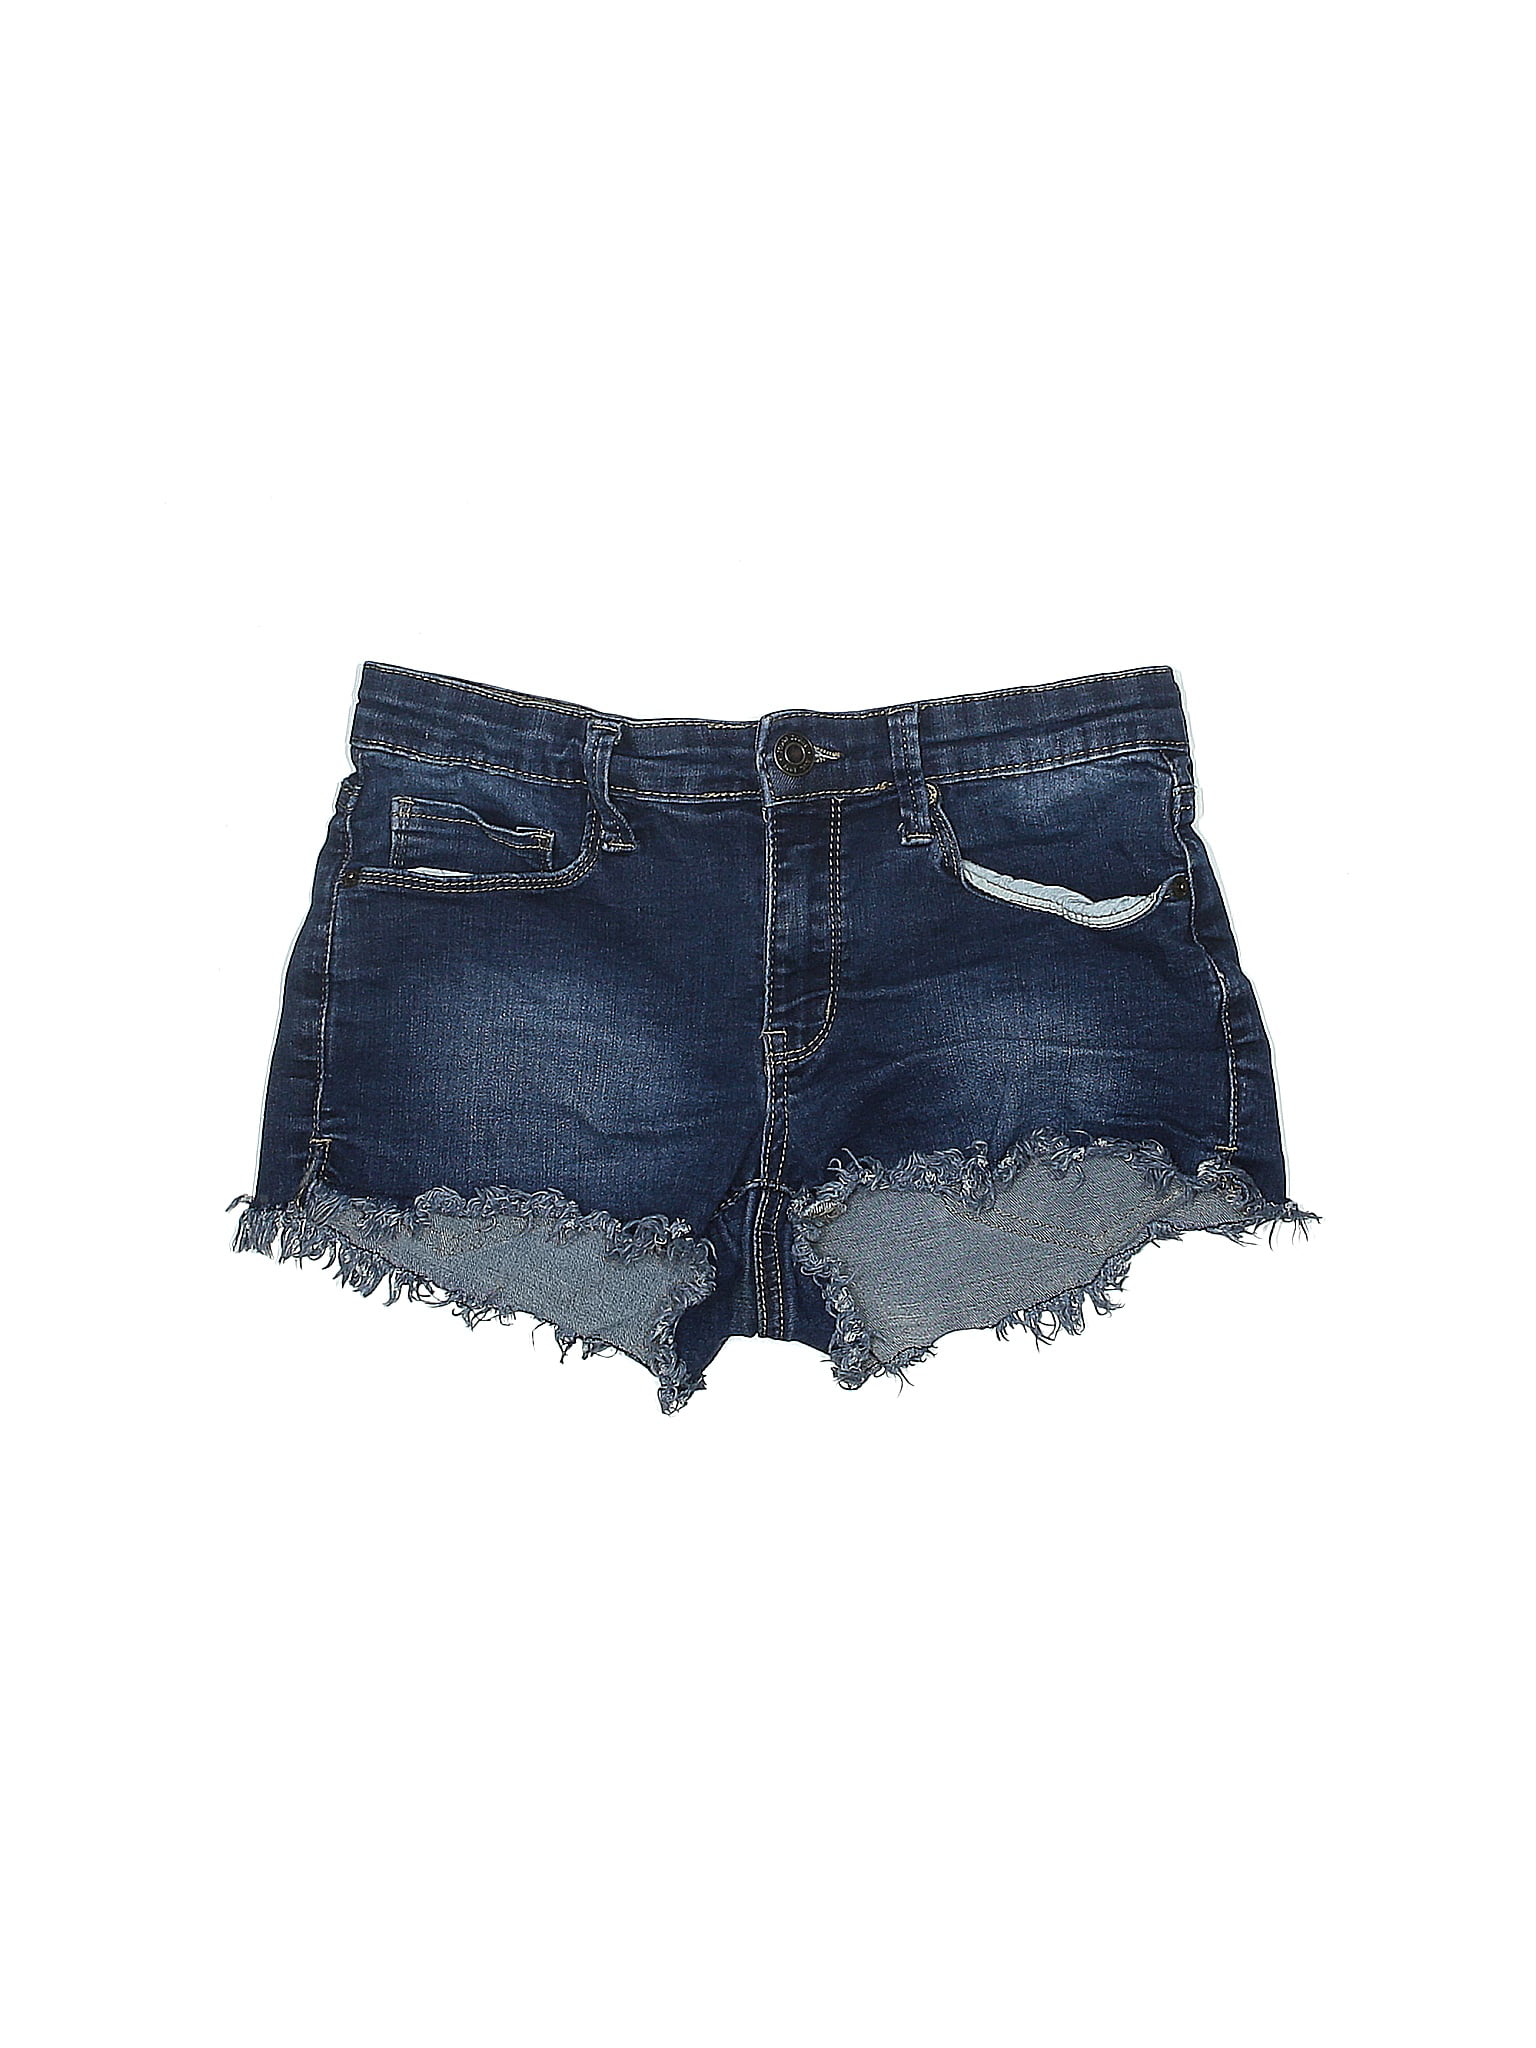 Mudd Denim Shorts ~ Pick Your Size & Color ~ New With Tags MSRP $34.00 